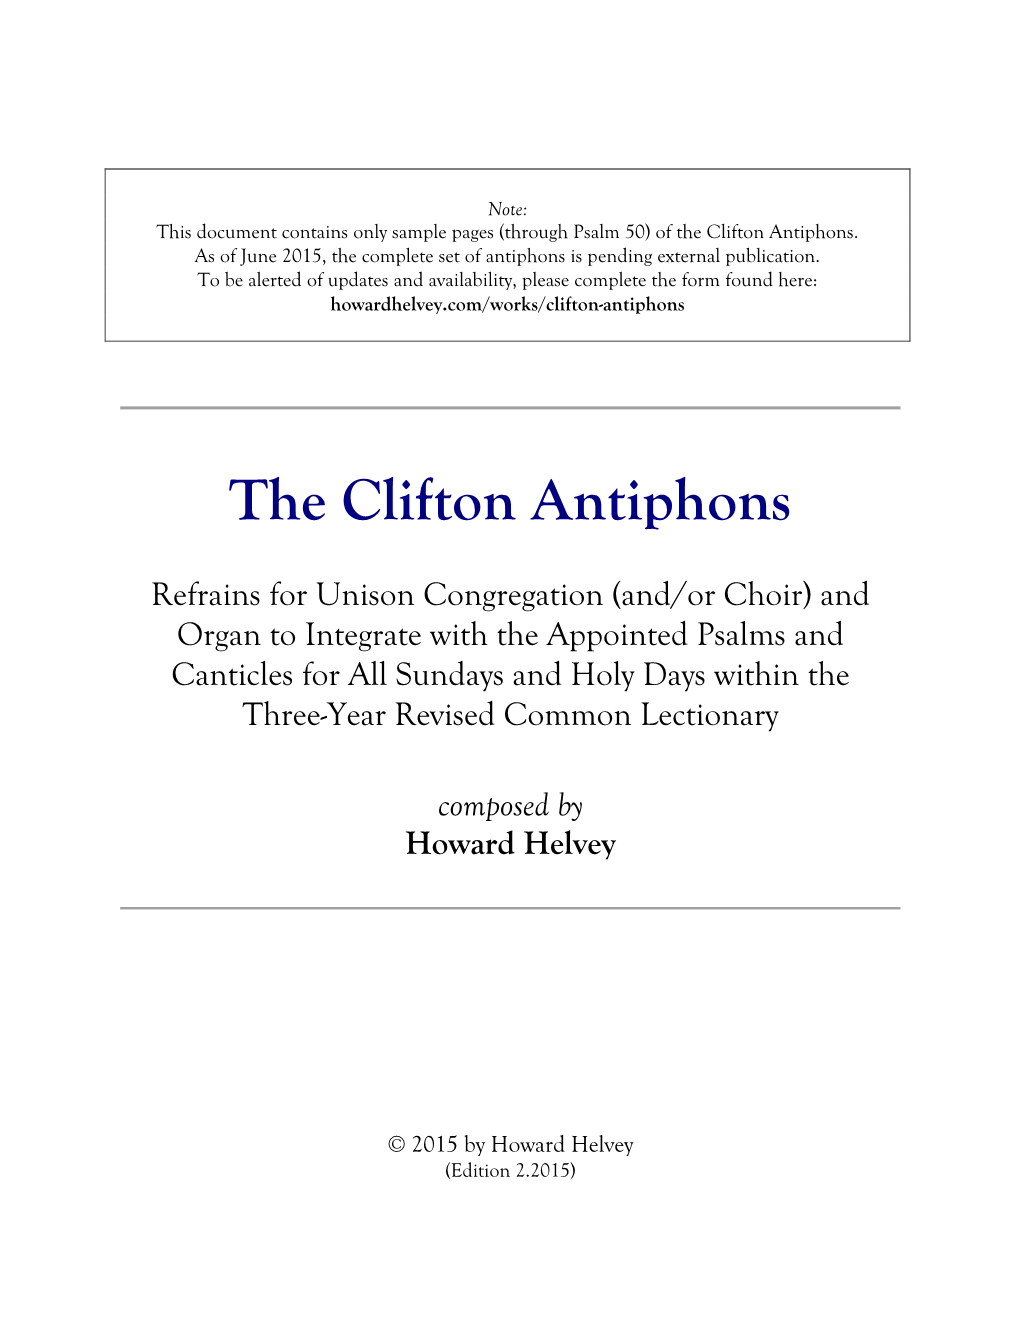 The Clifton Antiphons